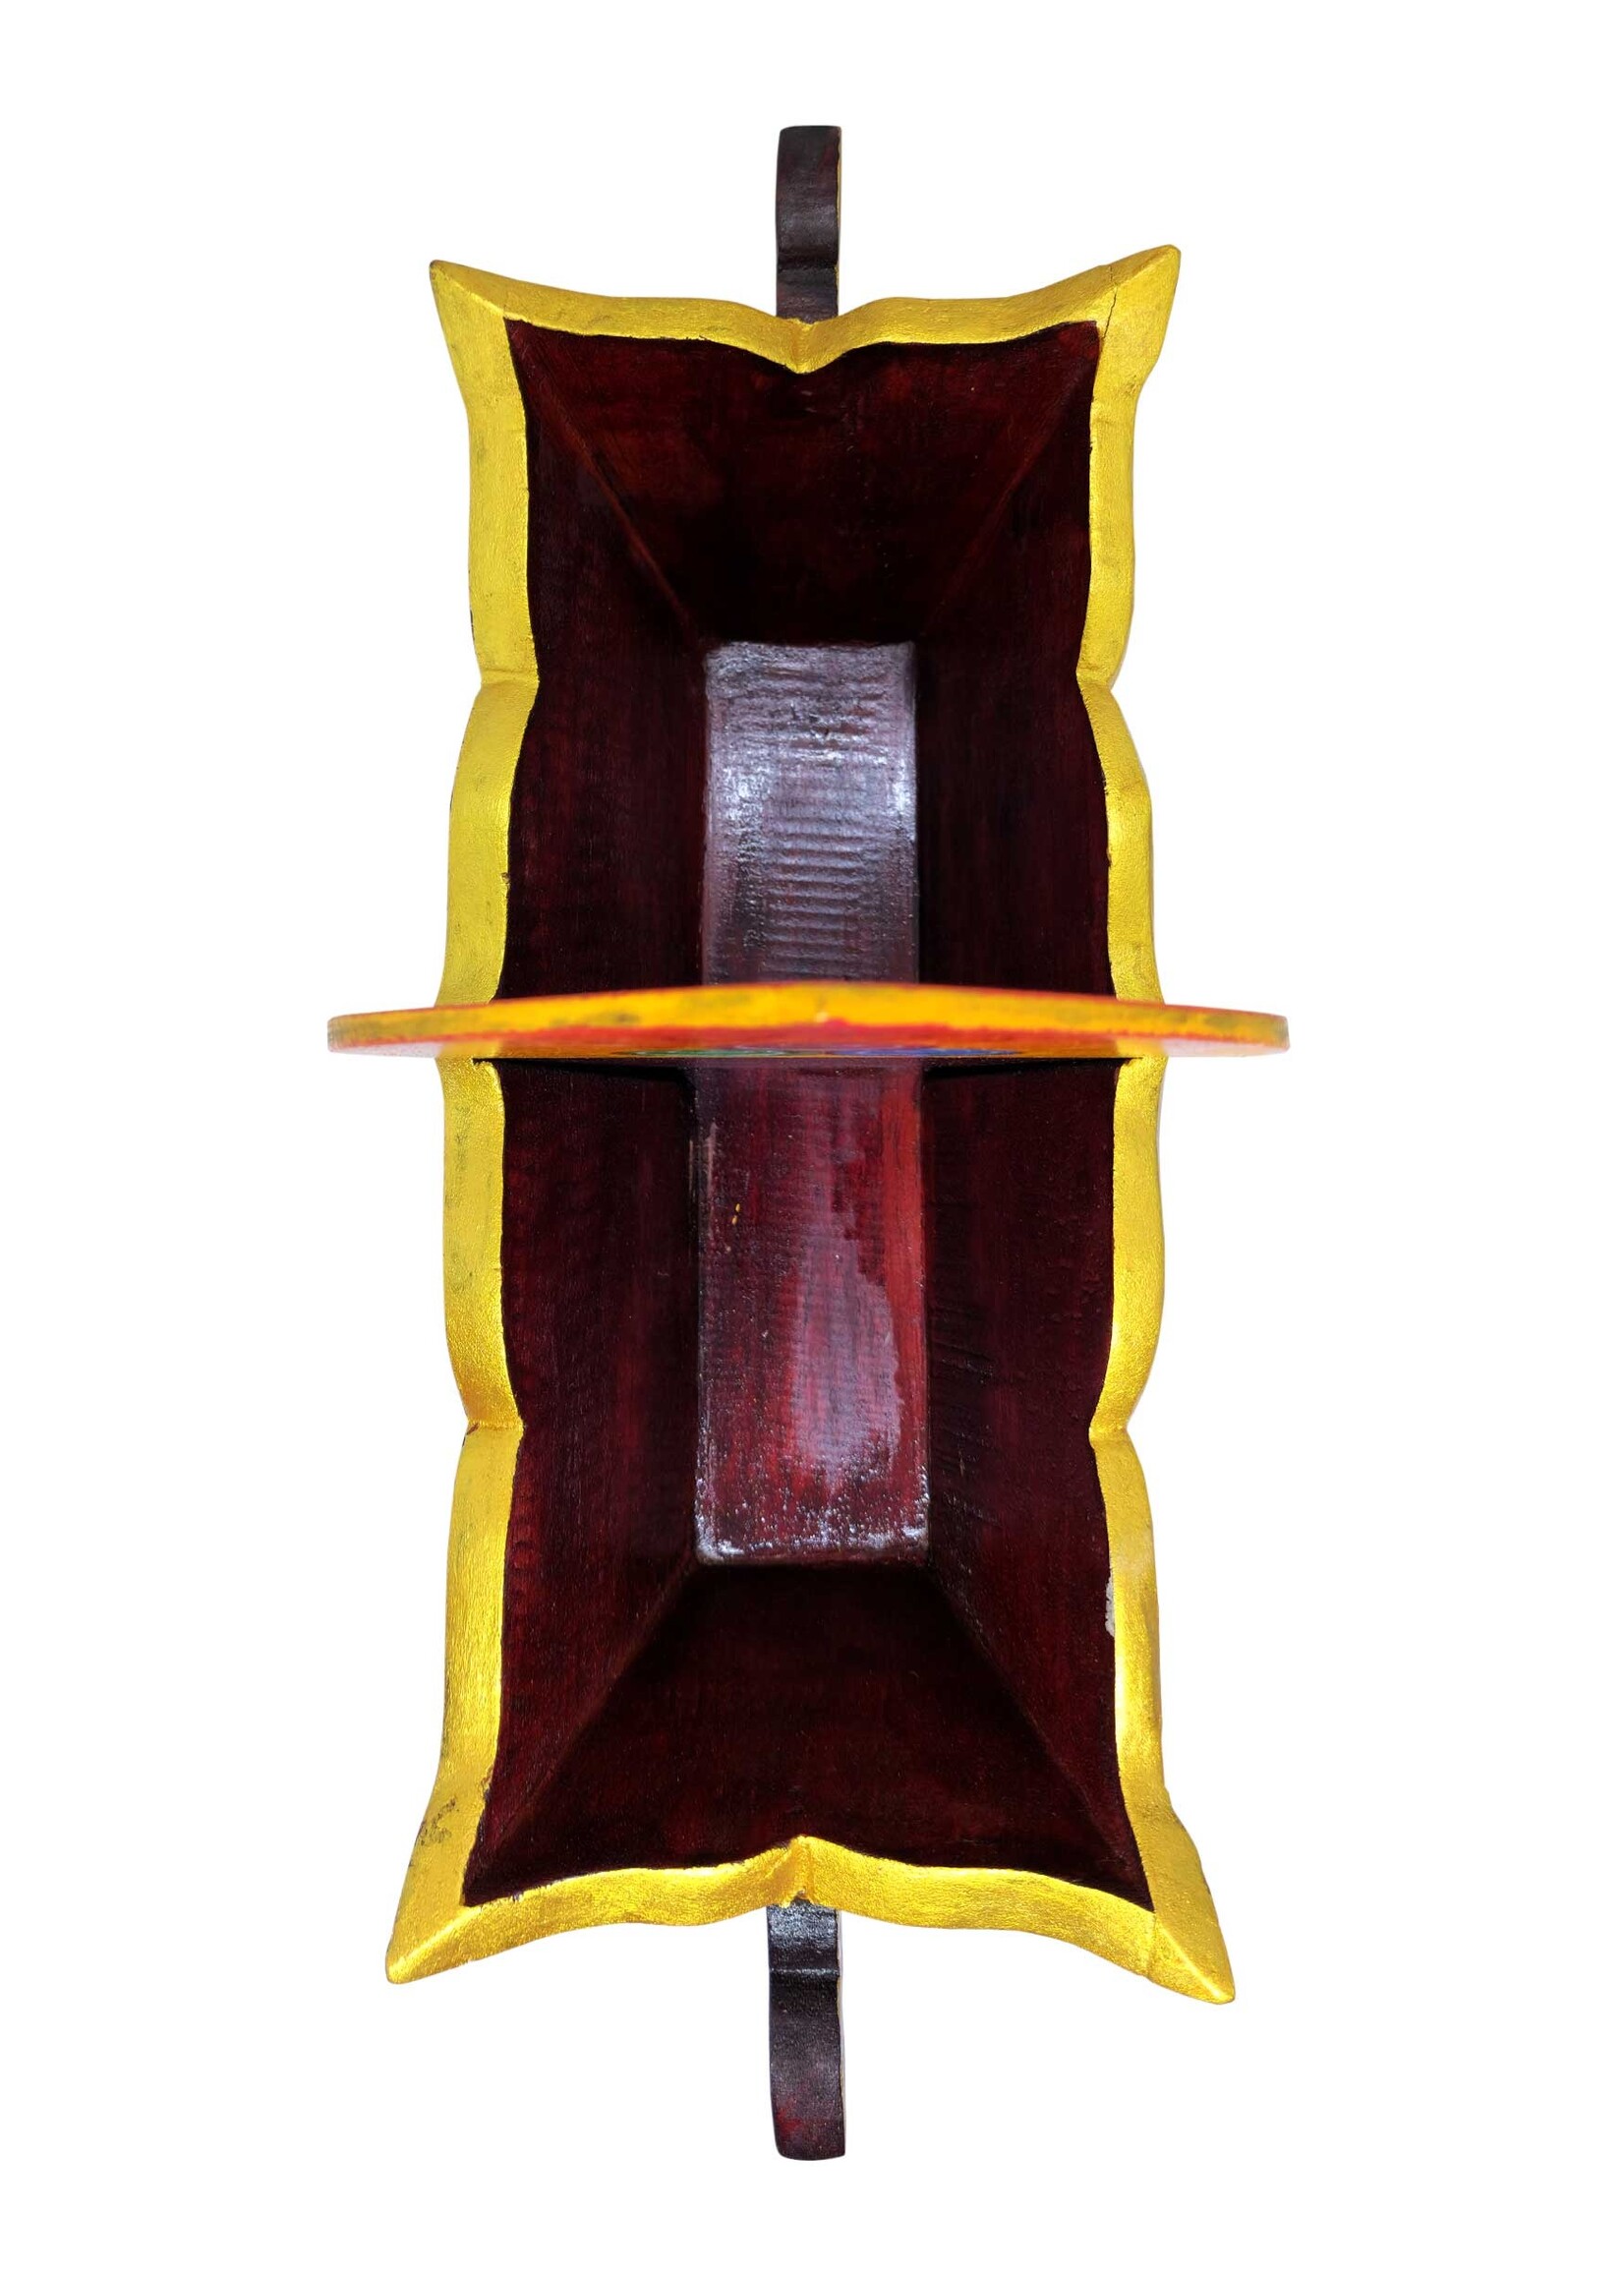 Tibetan Chemar Bo, Handcrafted from Wood